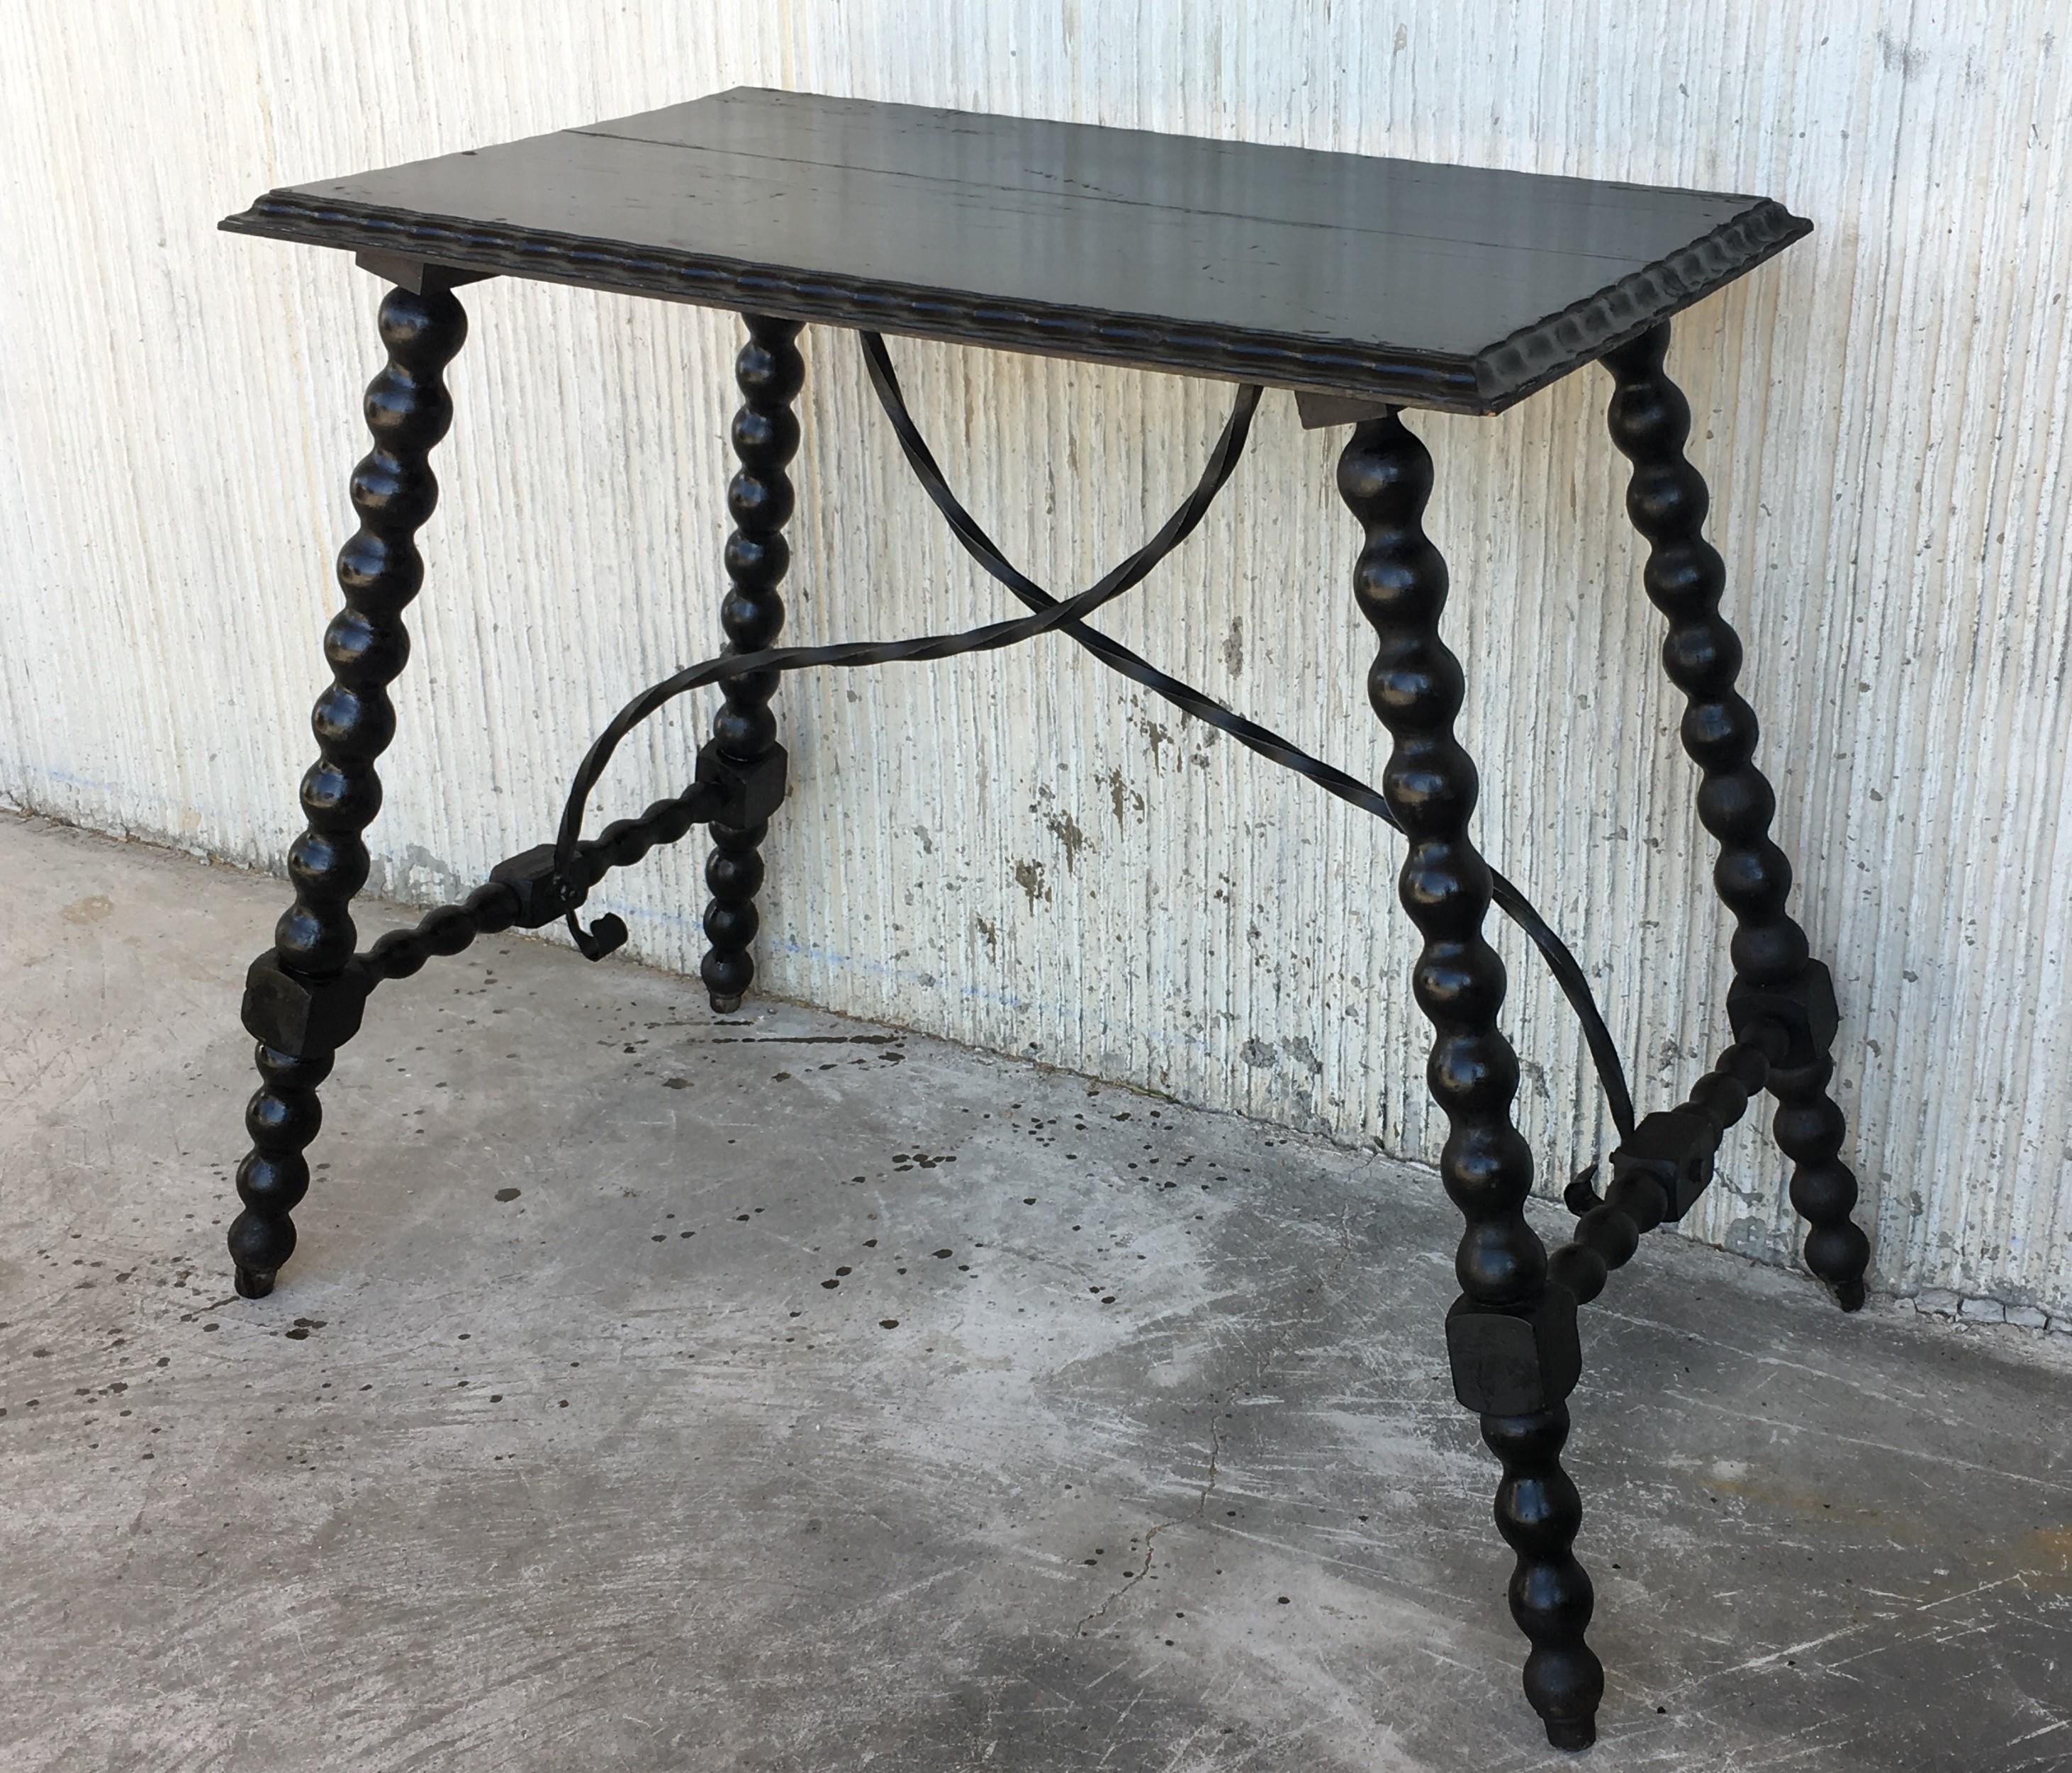 19th century Spanish Baroque ebonized side table with iron stretcher and carved top in walnut.